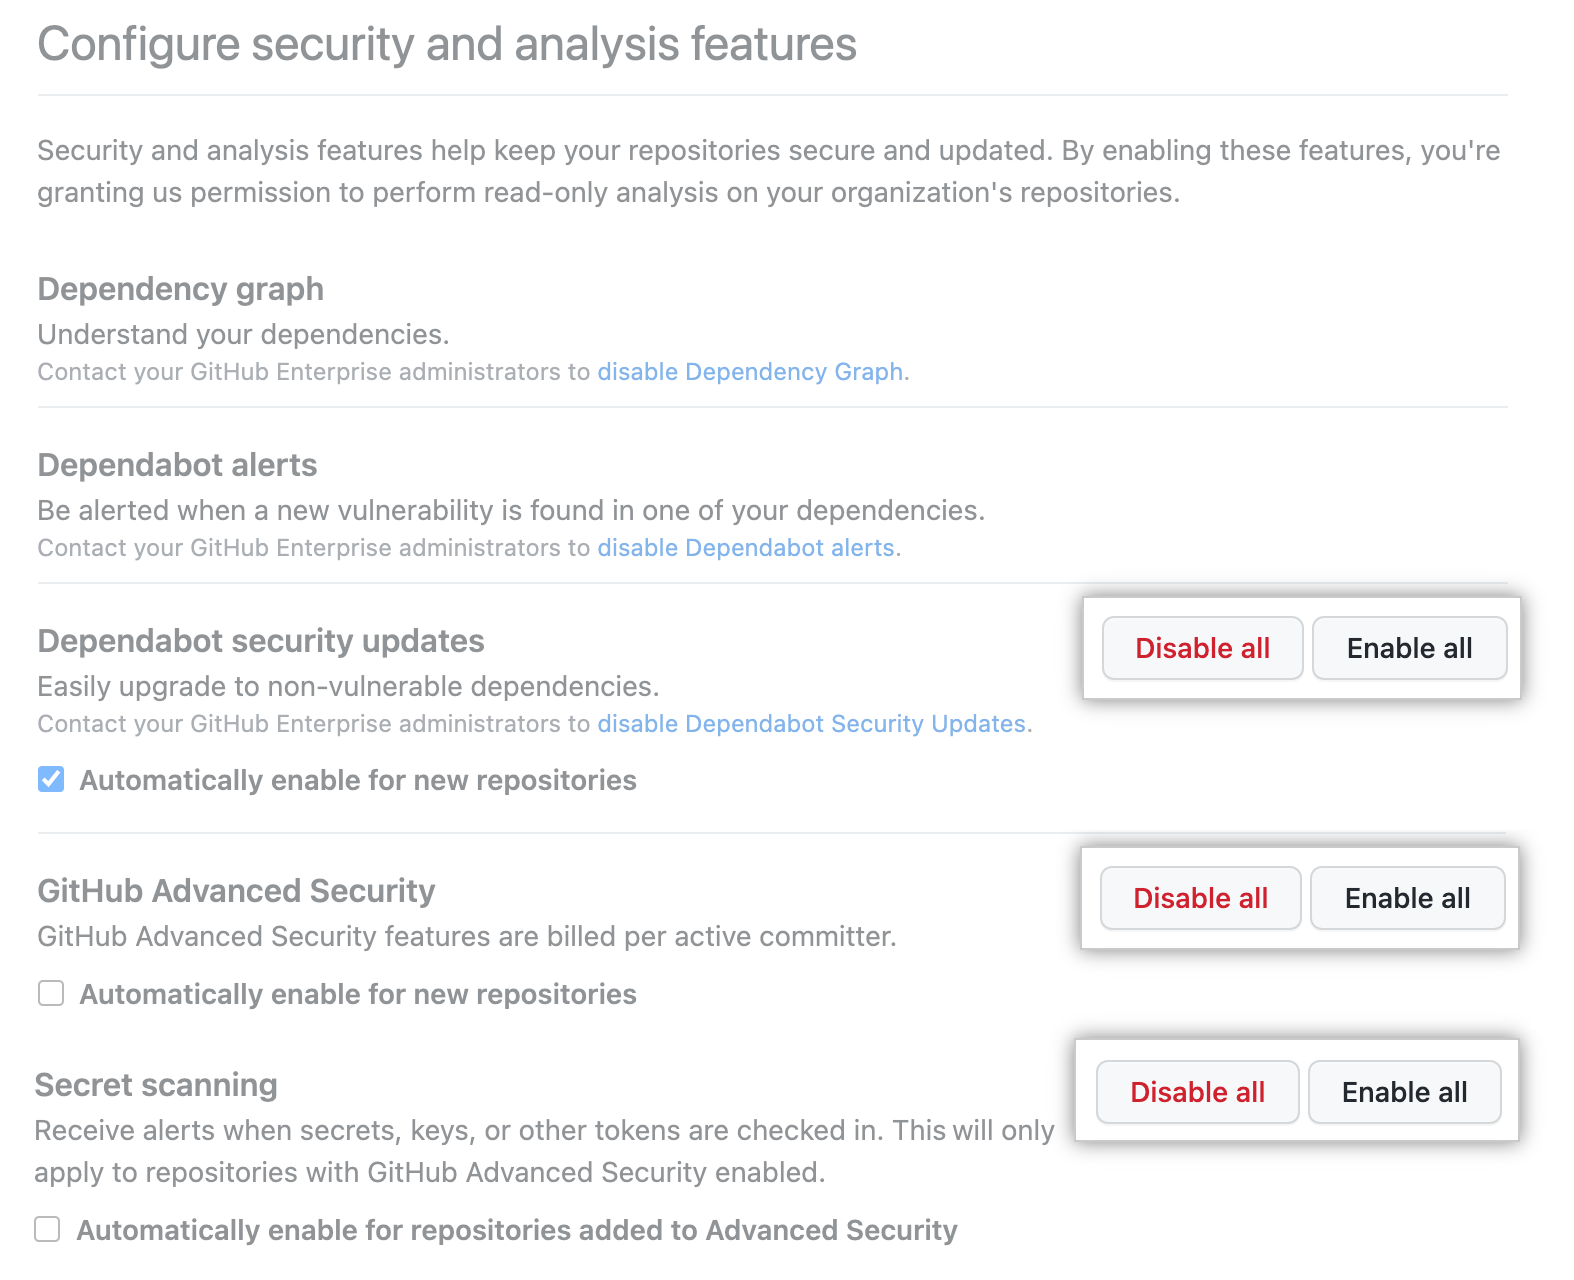 "Enable all" or "Disable all" button for "Configure security and analysis" features